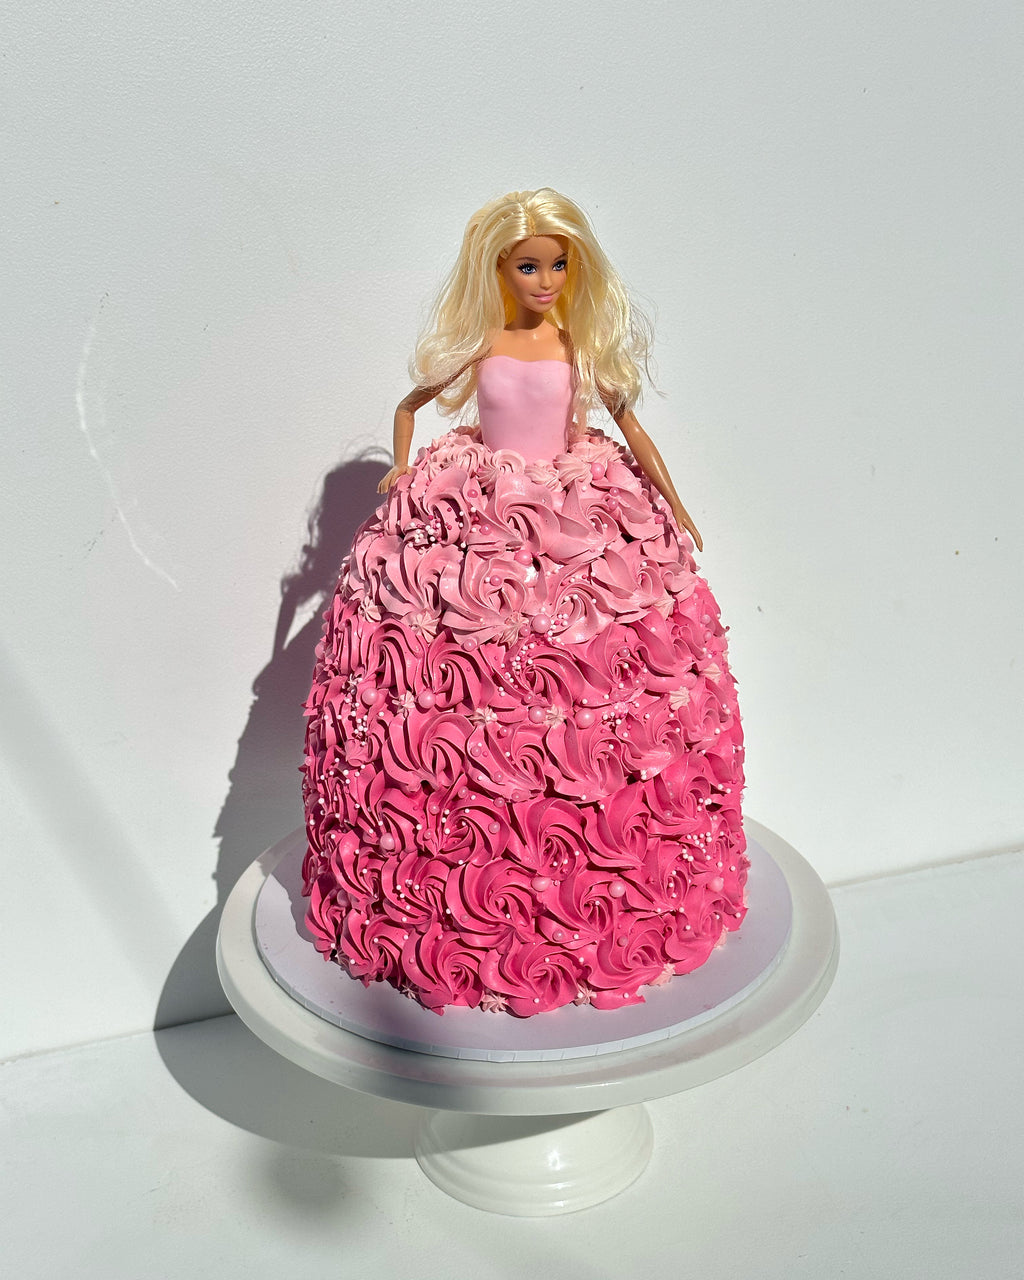 Spectacular Barbie birthday Cakes for your diva | Gurgaon Bakers